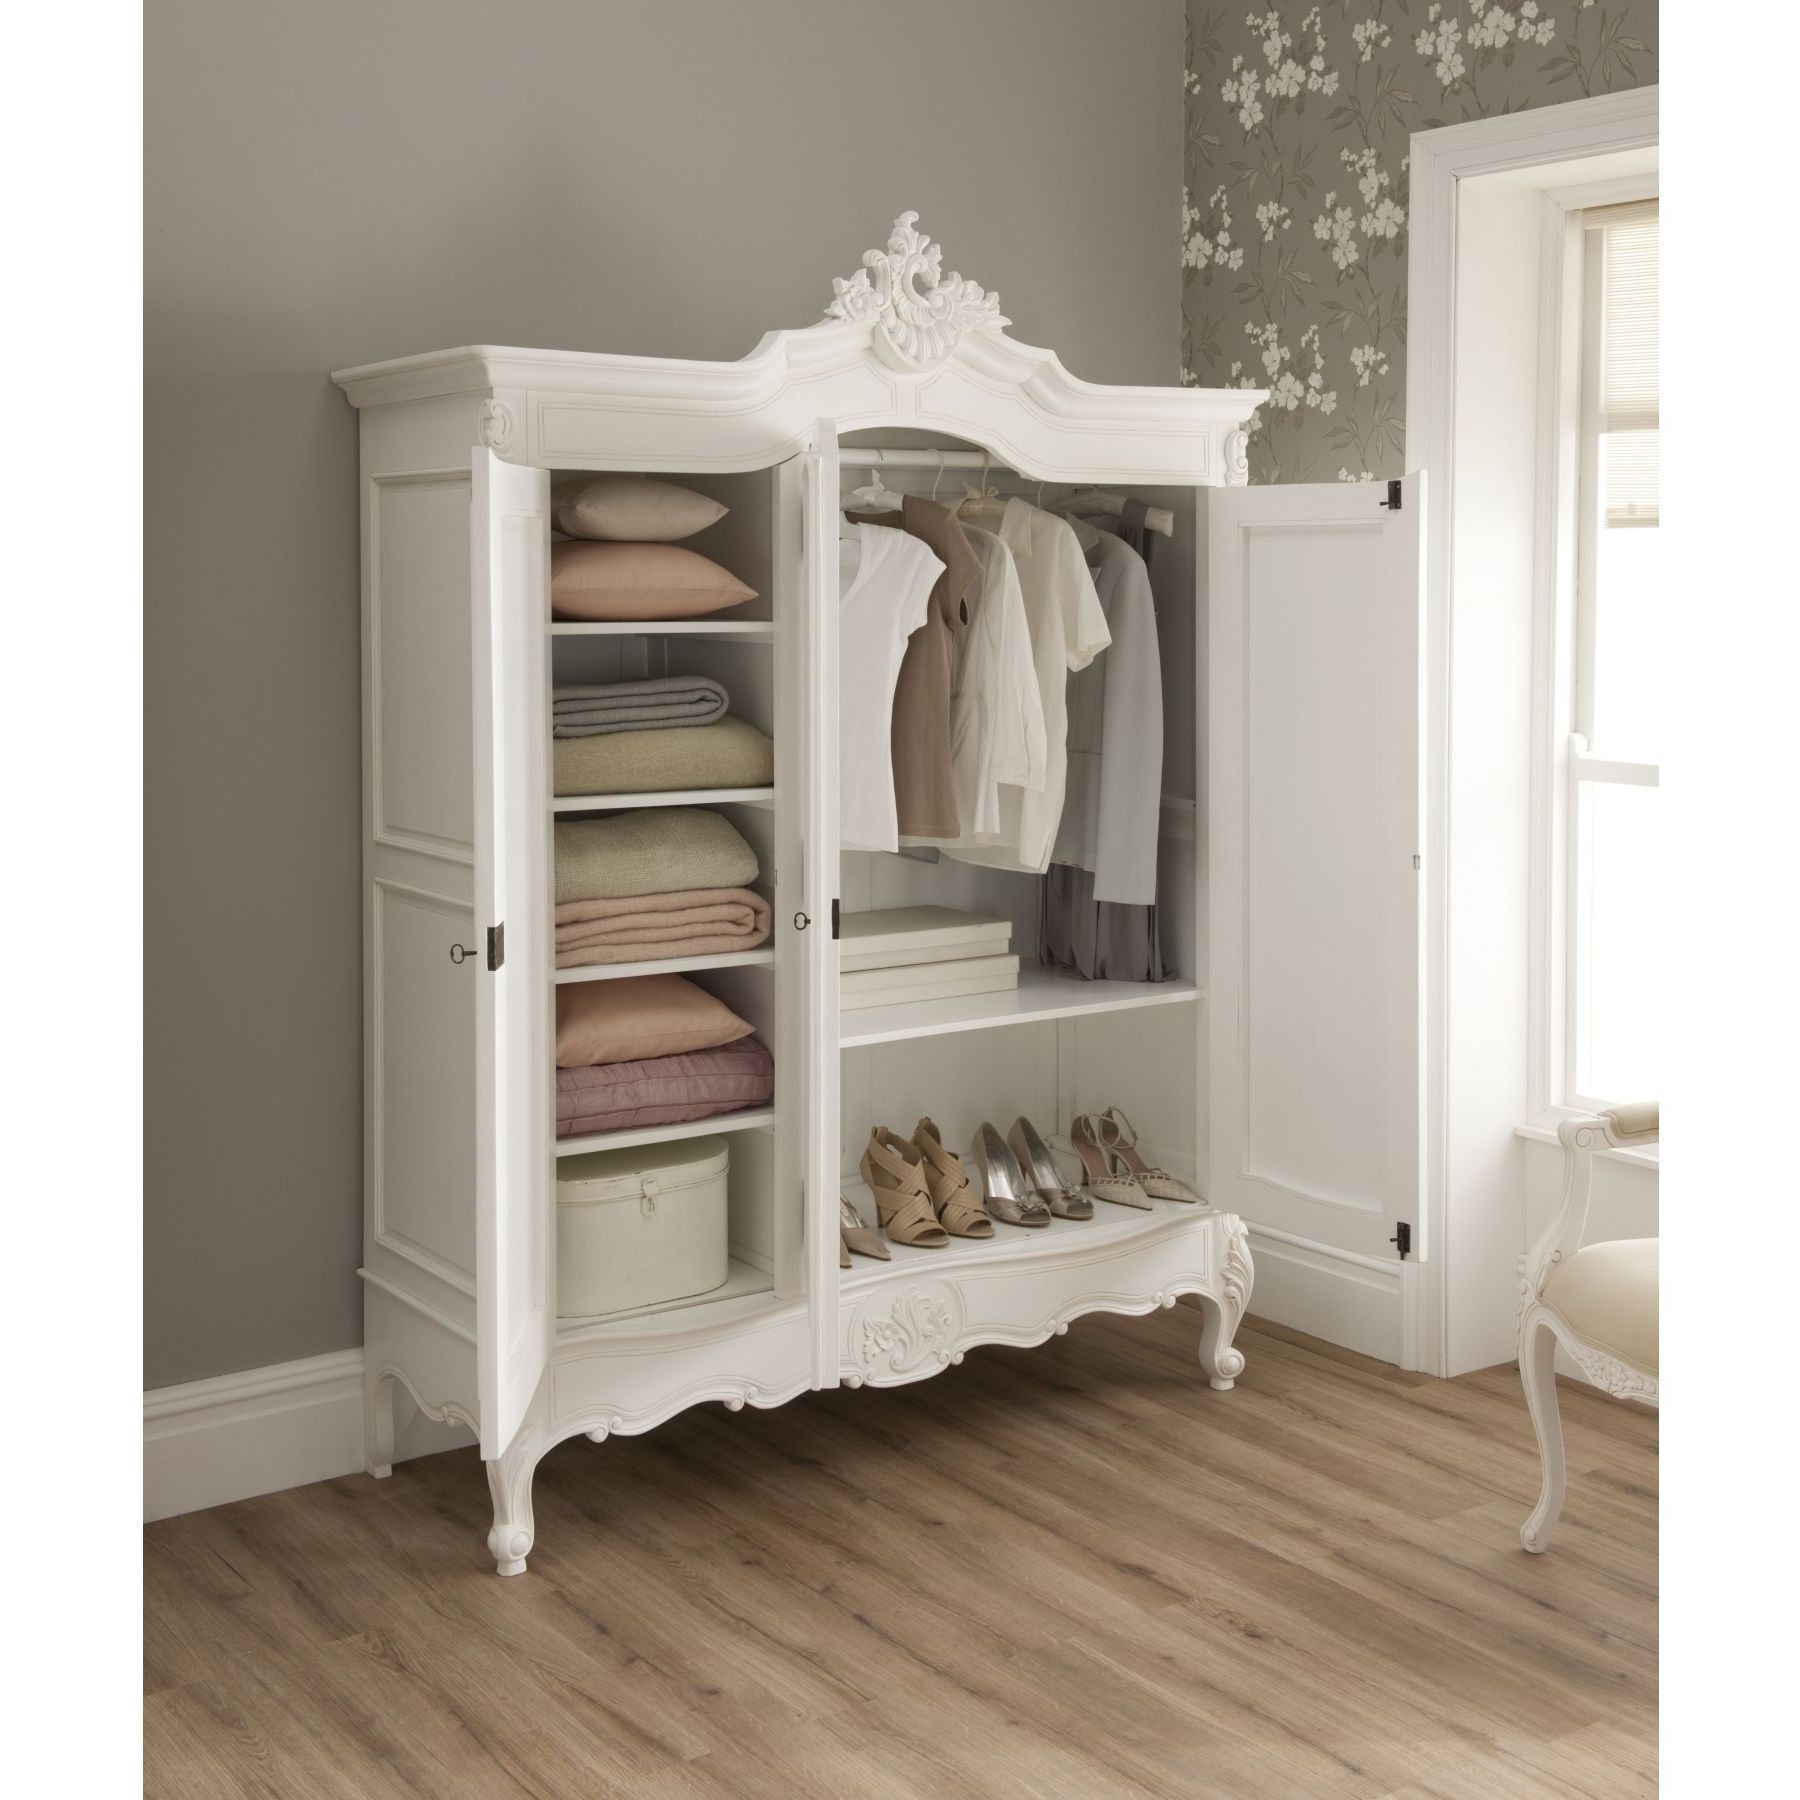 La Rochelle Antique French Style Wardrobe | Wardrobe Furniture, French  Furniture Bedroom, Shabby Chic Furniture Inside White Shabby Chic Wardrobes (View 5 of 20)